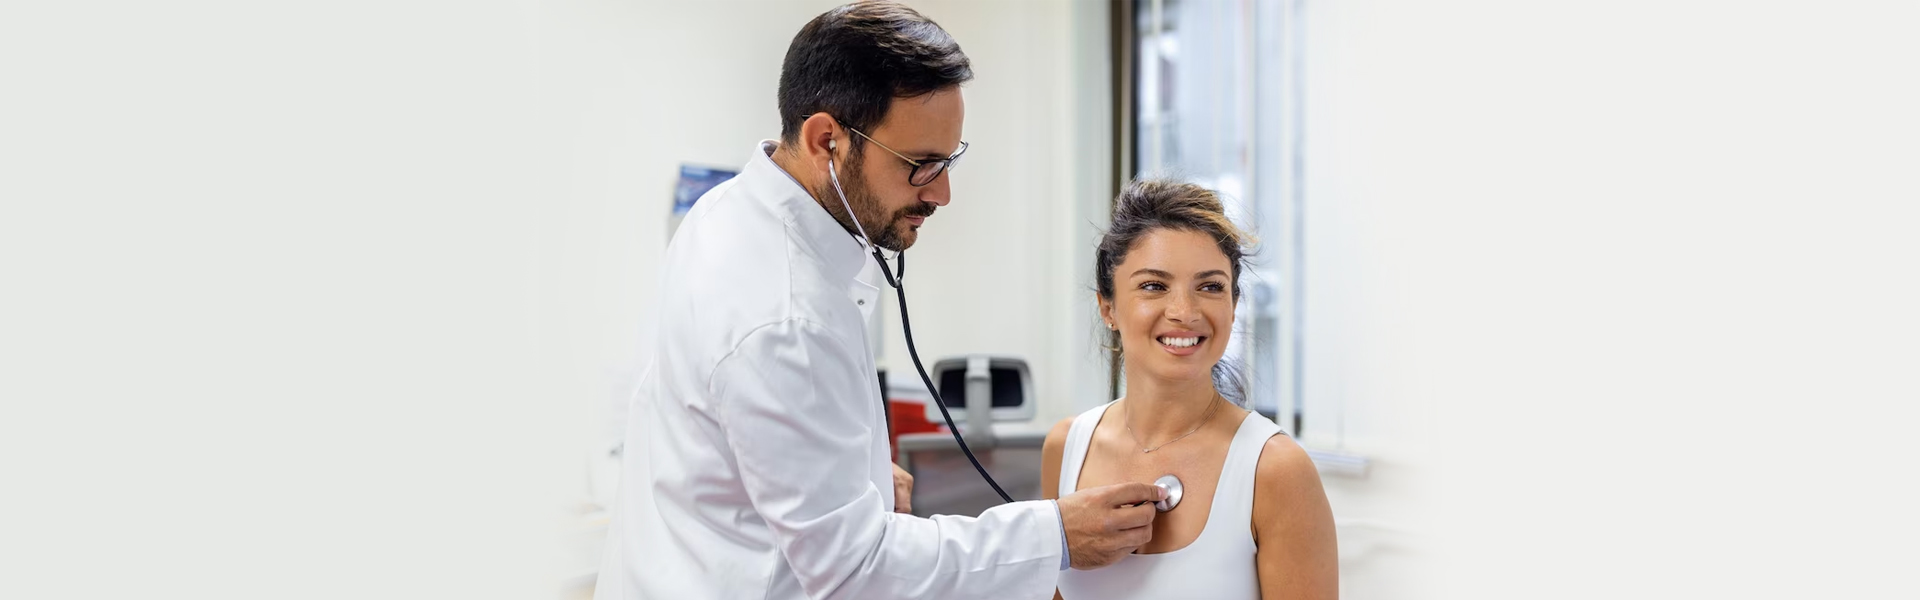 The Importance Of Regular Check-ups With a Primary Care Doctor